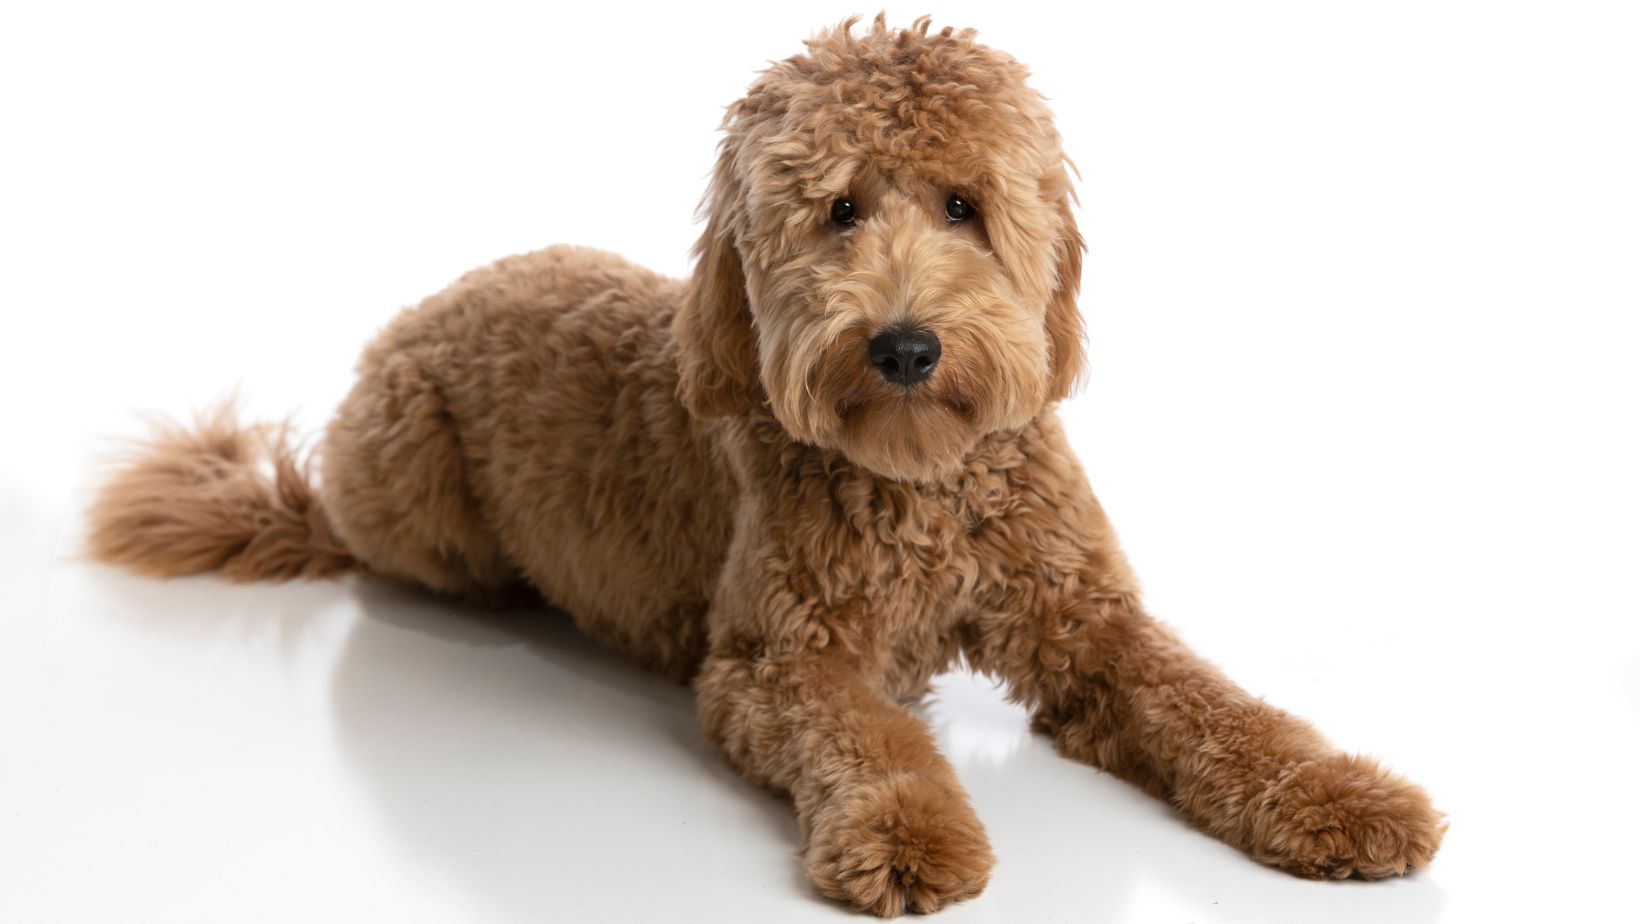 Goldendoodles can inherit different types of coats